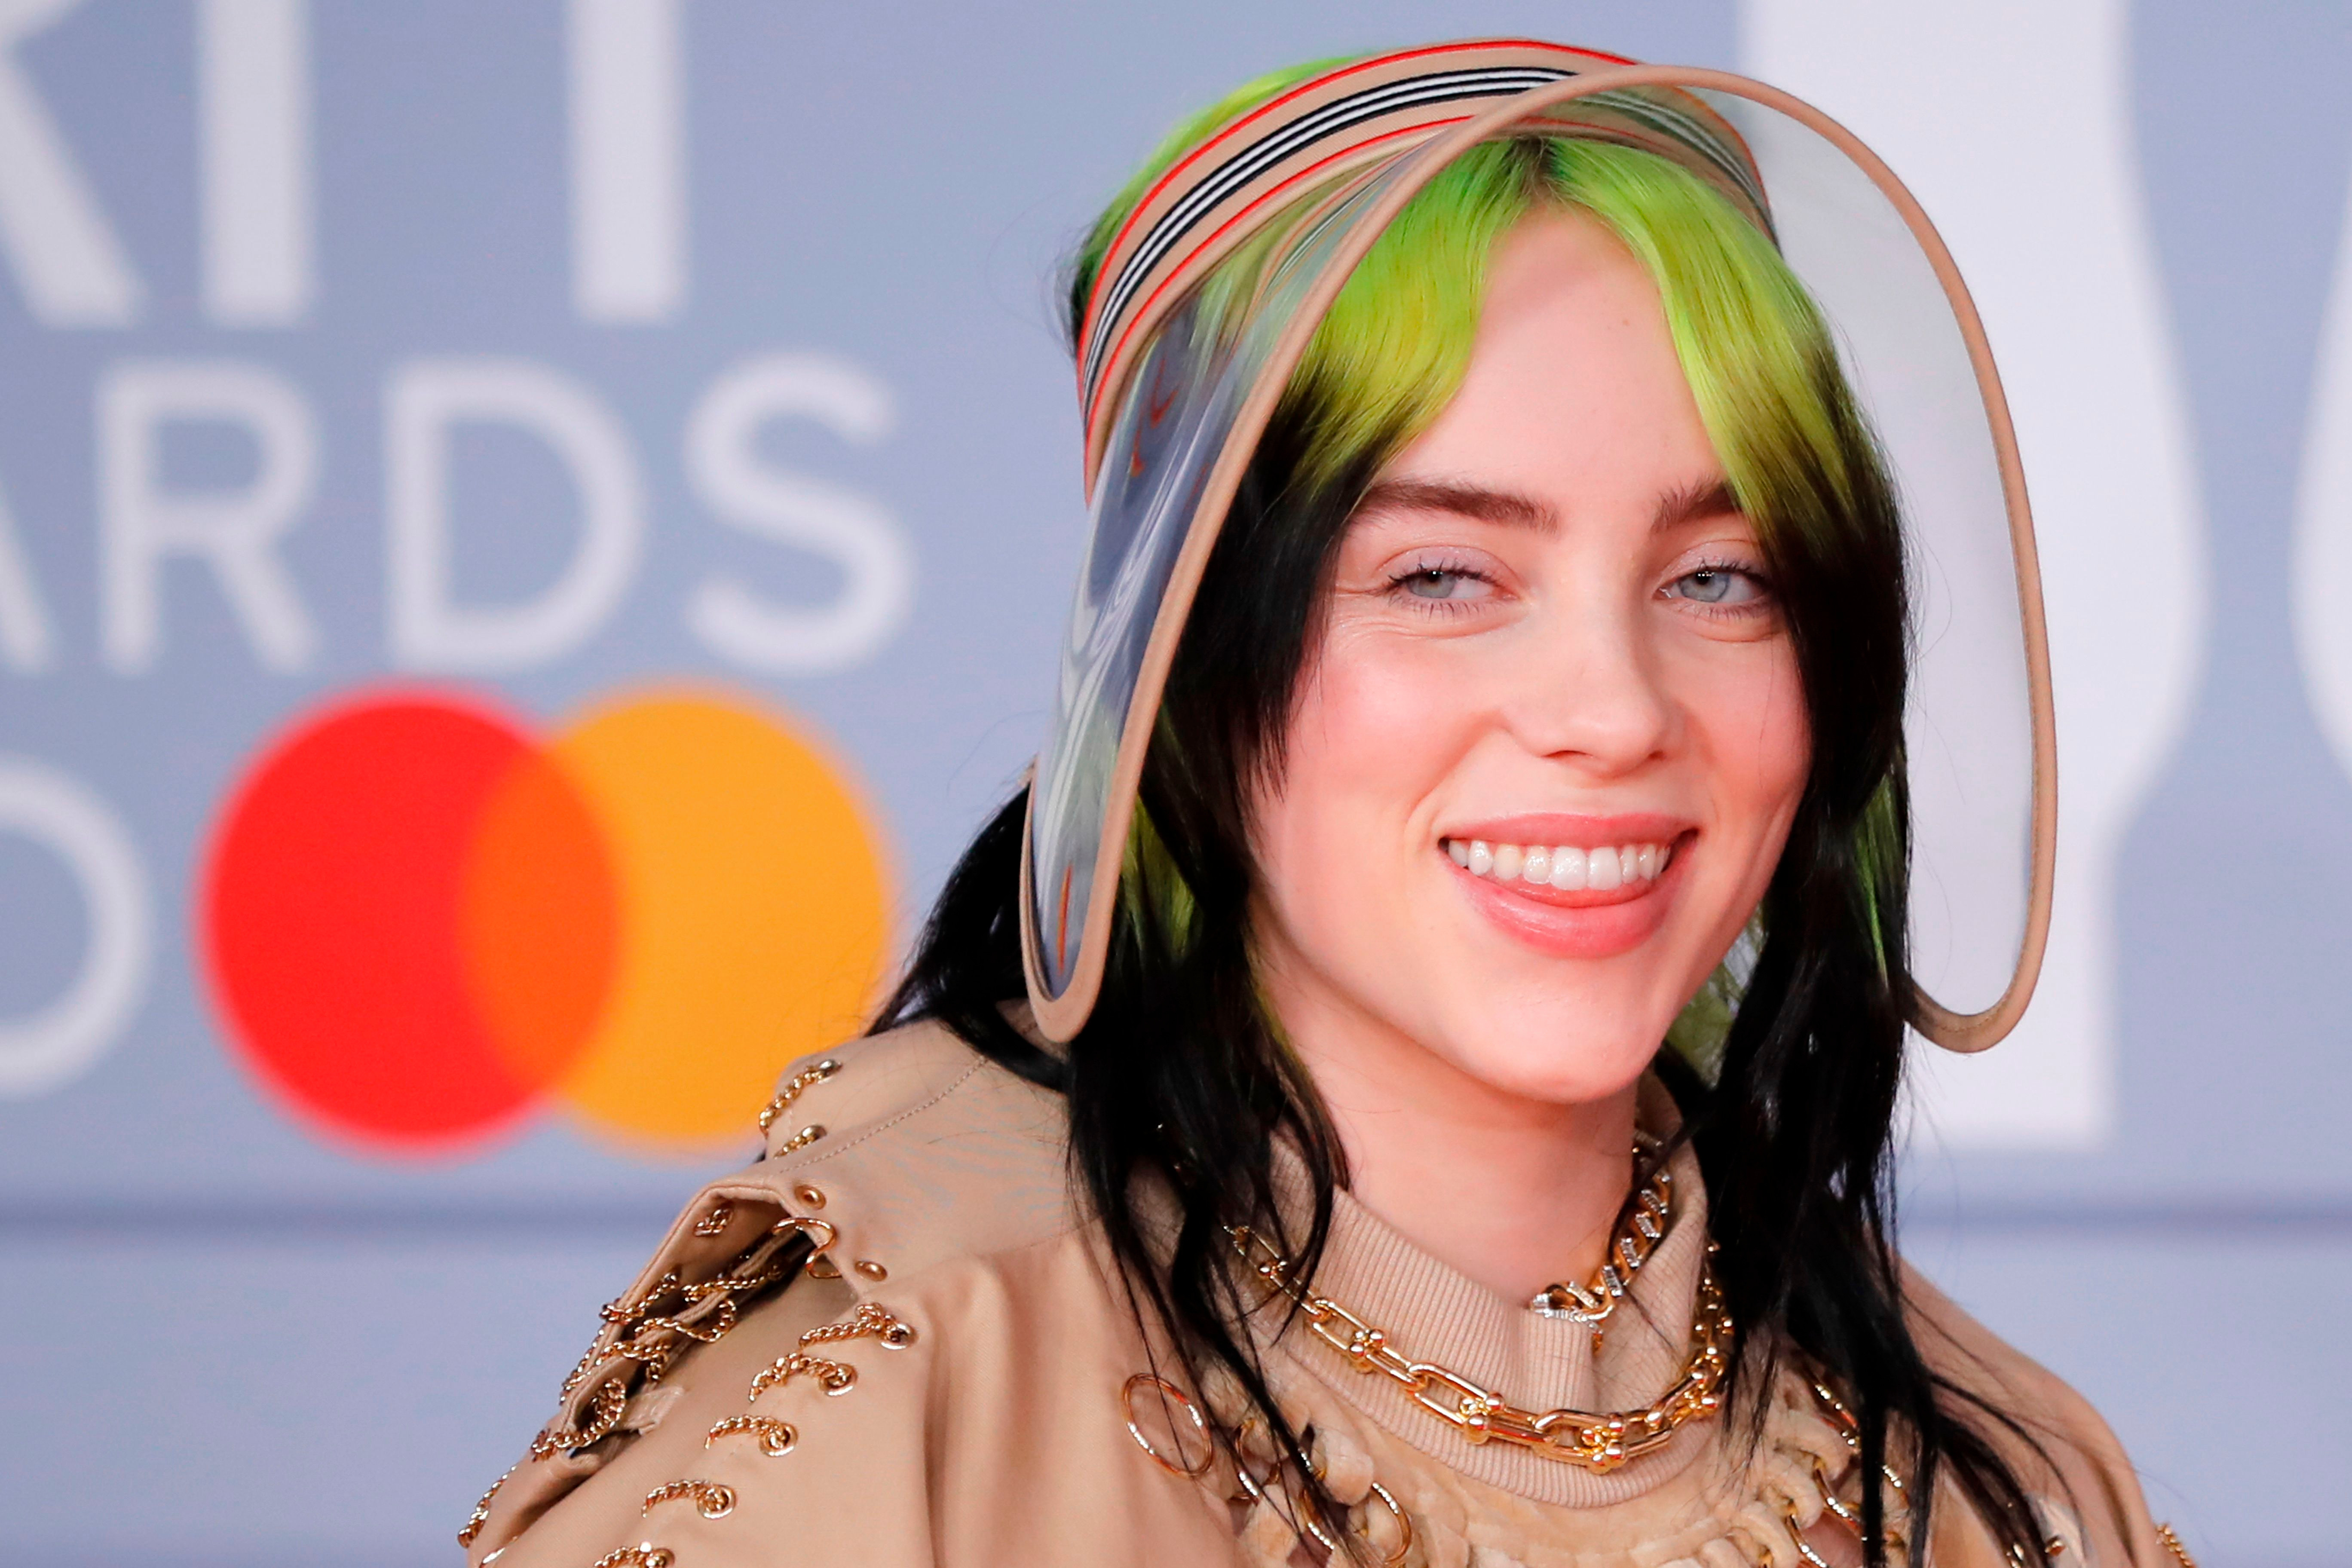 Billie Eilish promises to surprise fans with ‘some tricks’ after recording new album during lockdown